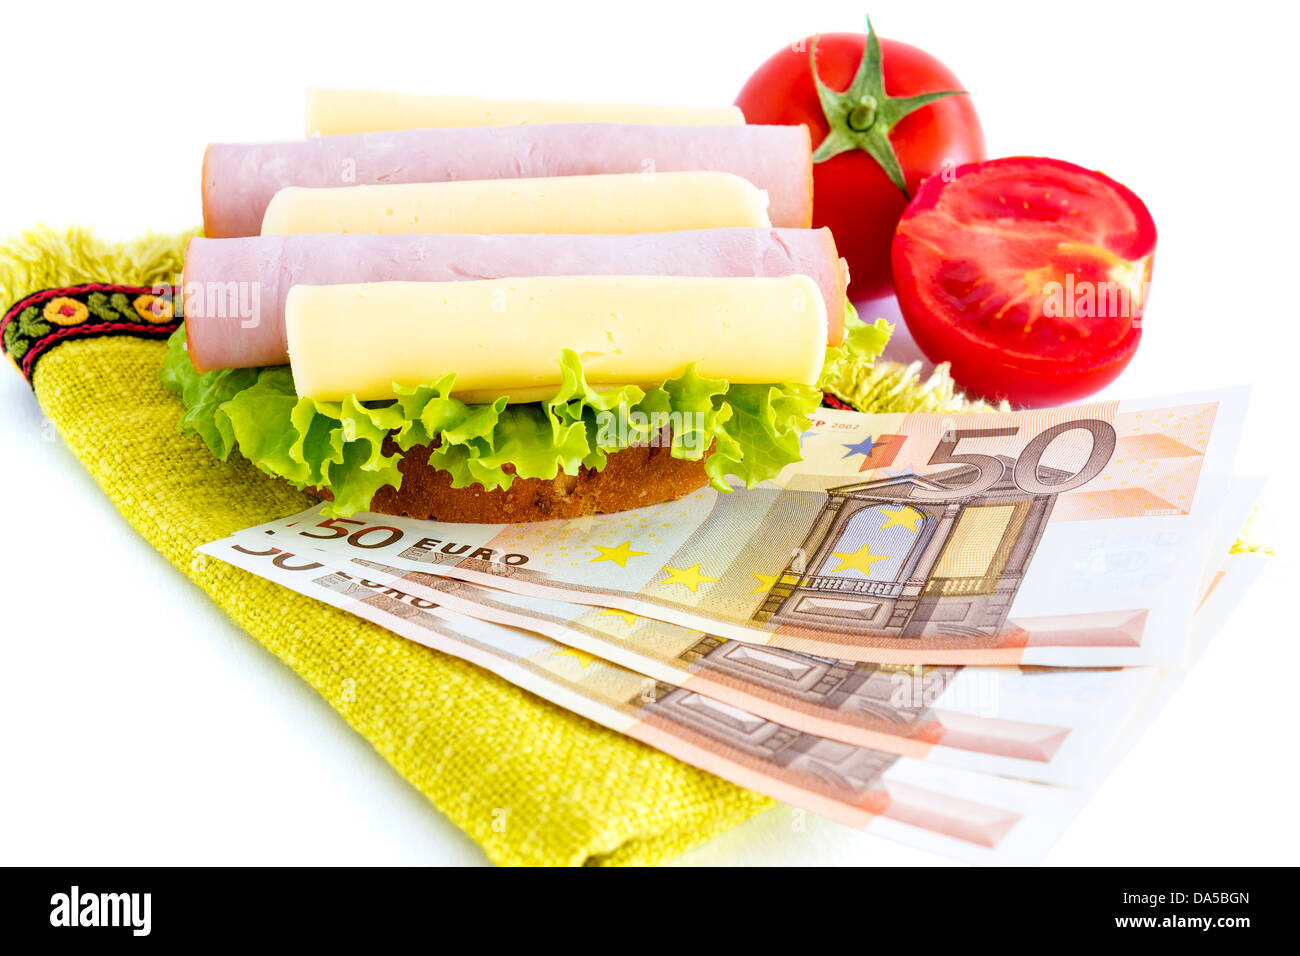 Sandwich and money which represents the hunger for money Stock Photo